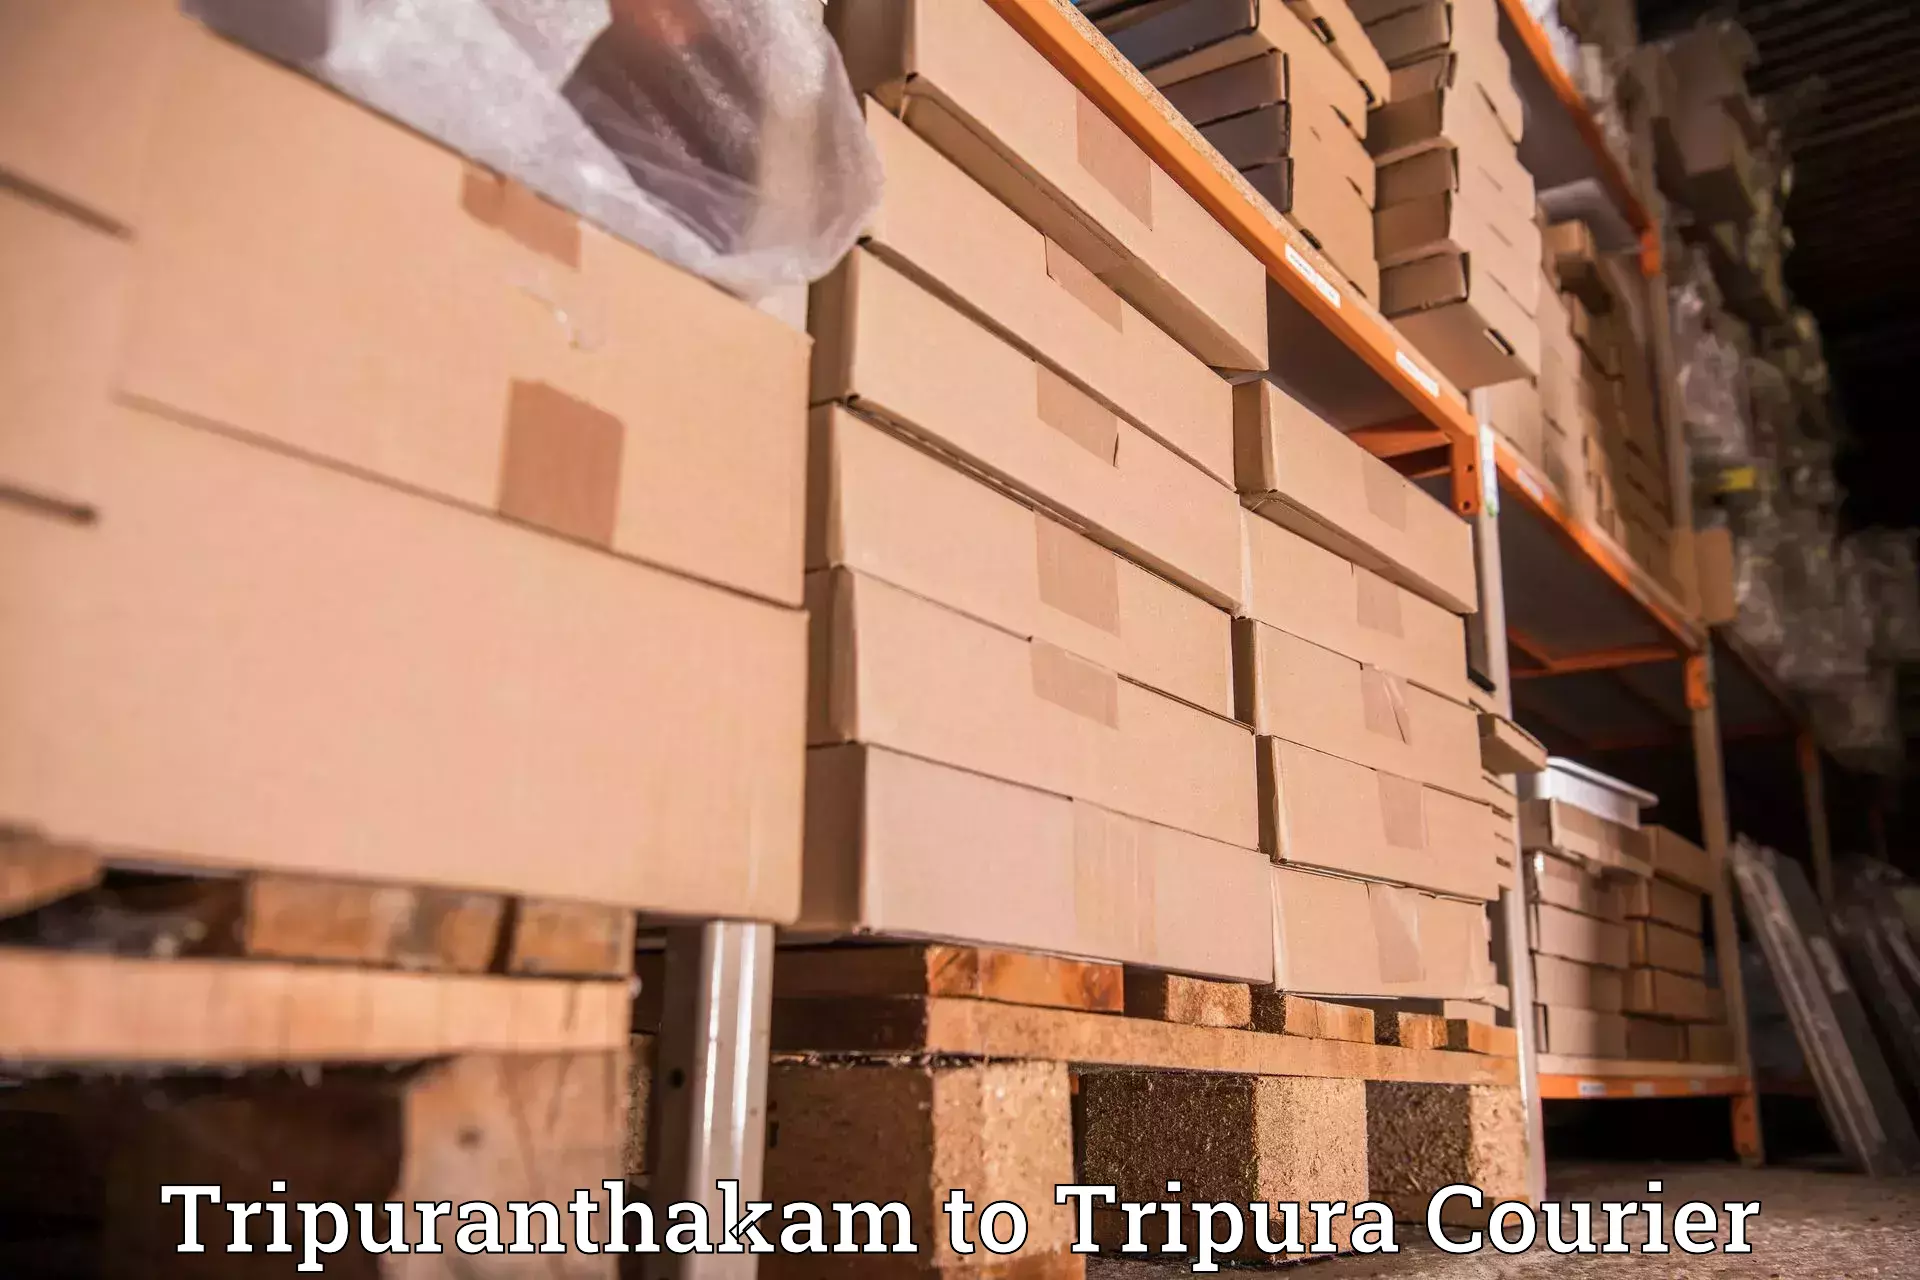 Flexible delivery schedules Tripuranthakam to Udaipur Tripura